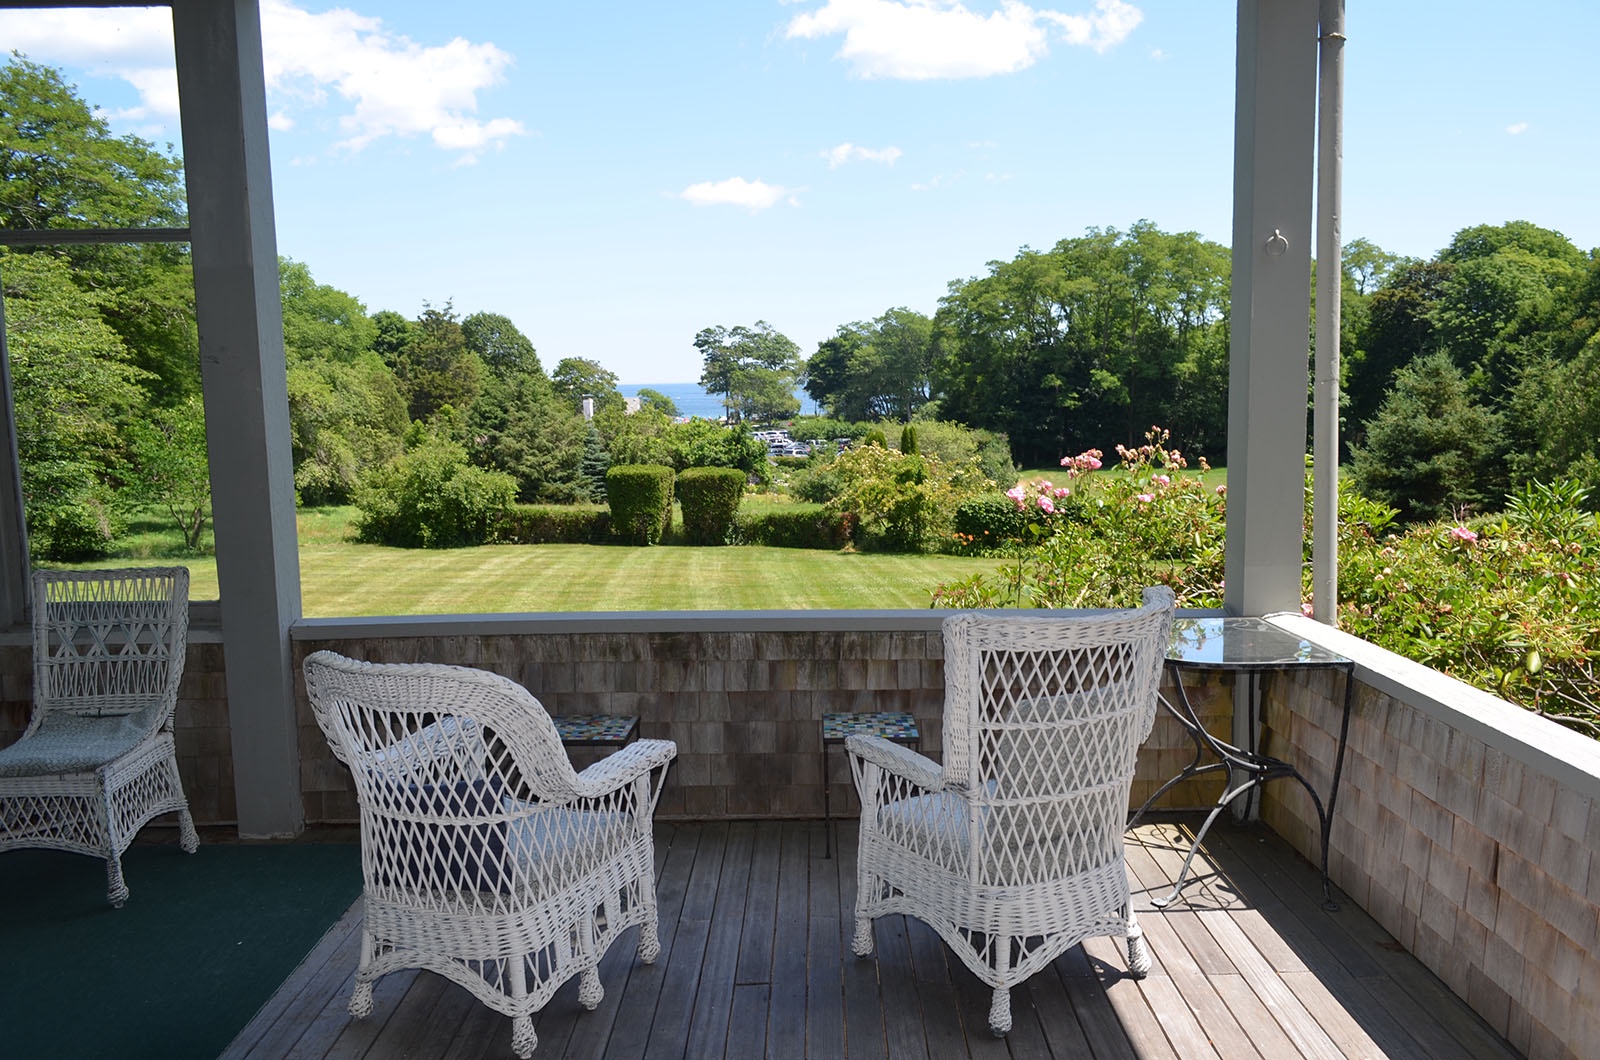 Enjoy a cool breeze and ocean views from the shade of the generous back porch.